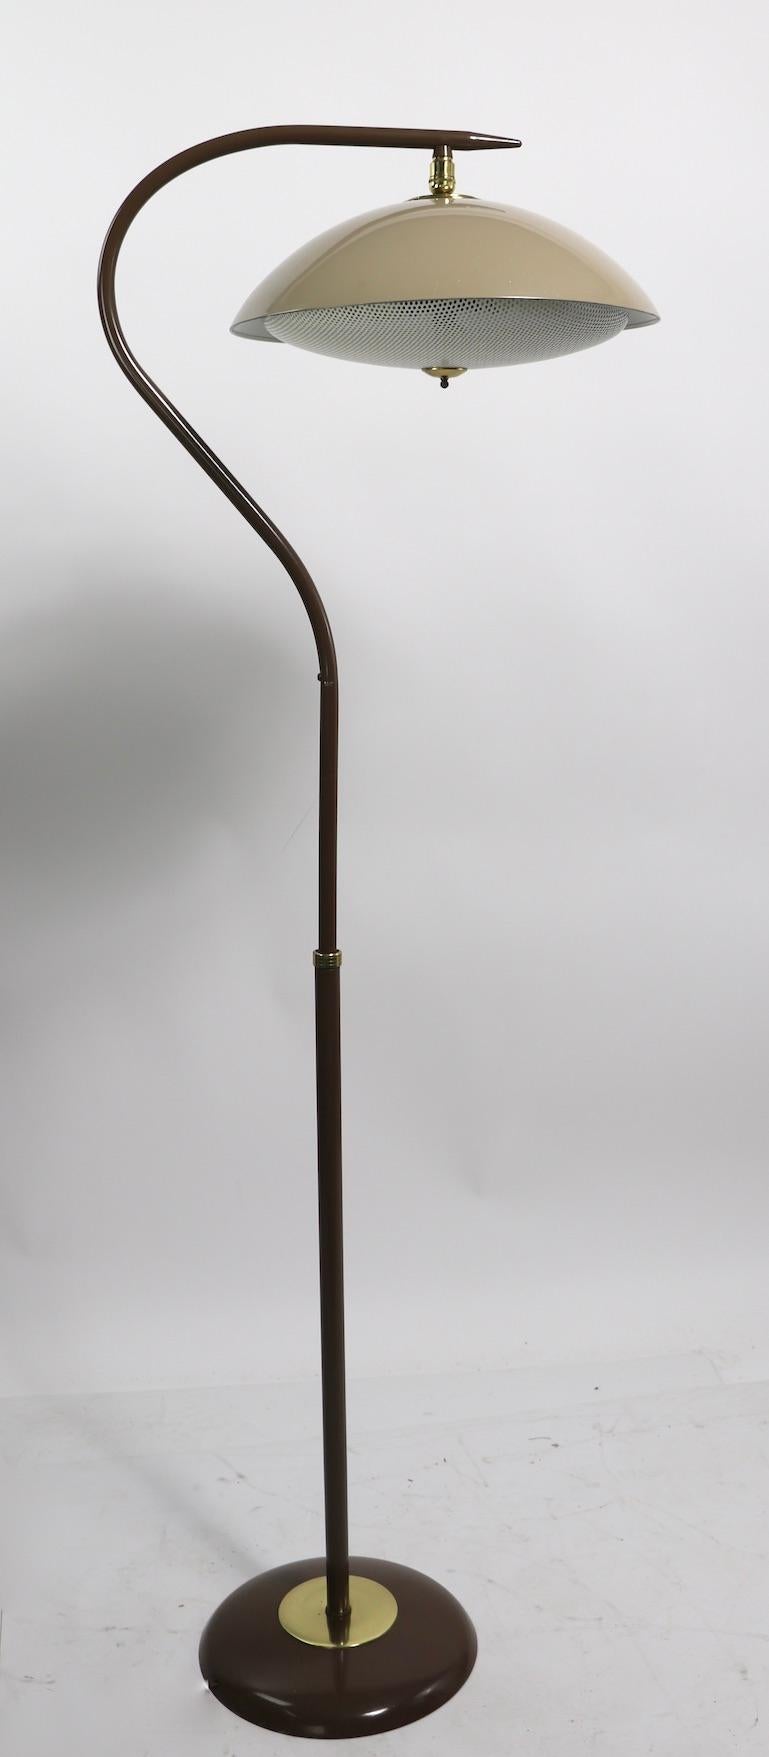 Very sexy adjustable floor, or reading lamp designed by Gerald Thurston for Lightolier. This example has a swivel, tilt disk shade (shade 14 in. diameter.) which is attached to a curved arm that can be adjusted in height ( H 57 in x L 46 in. )